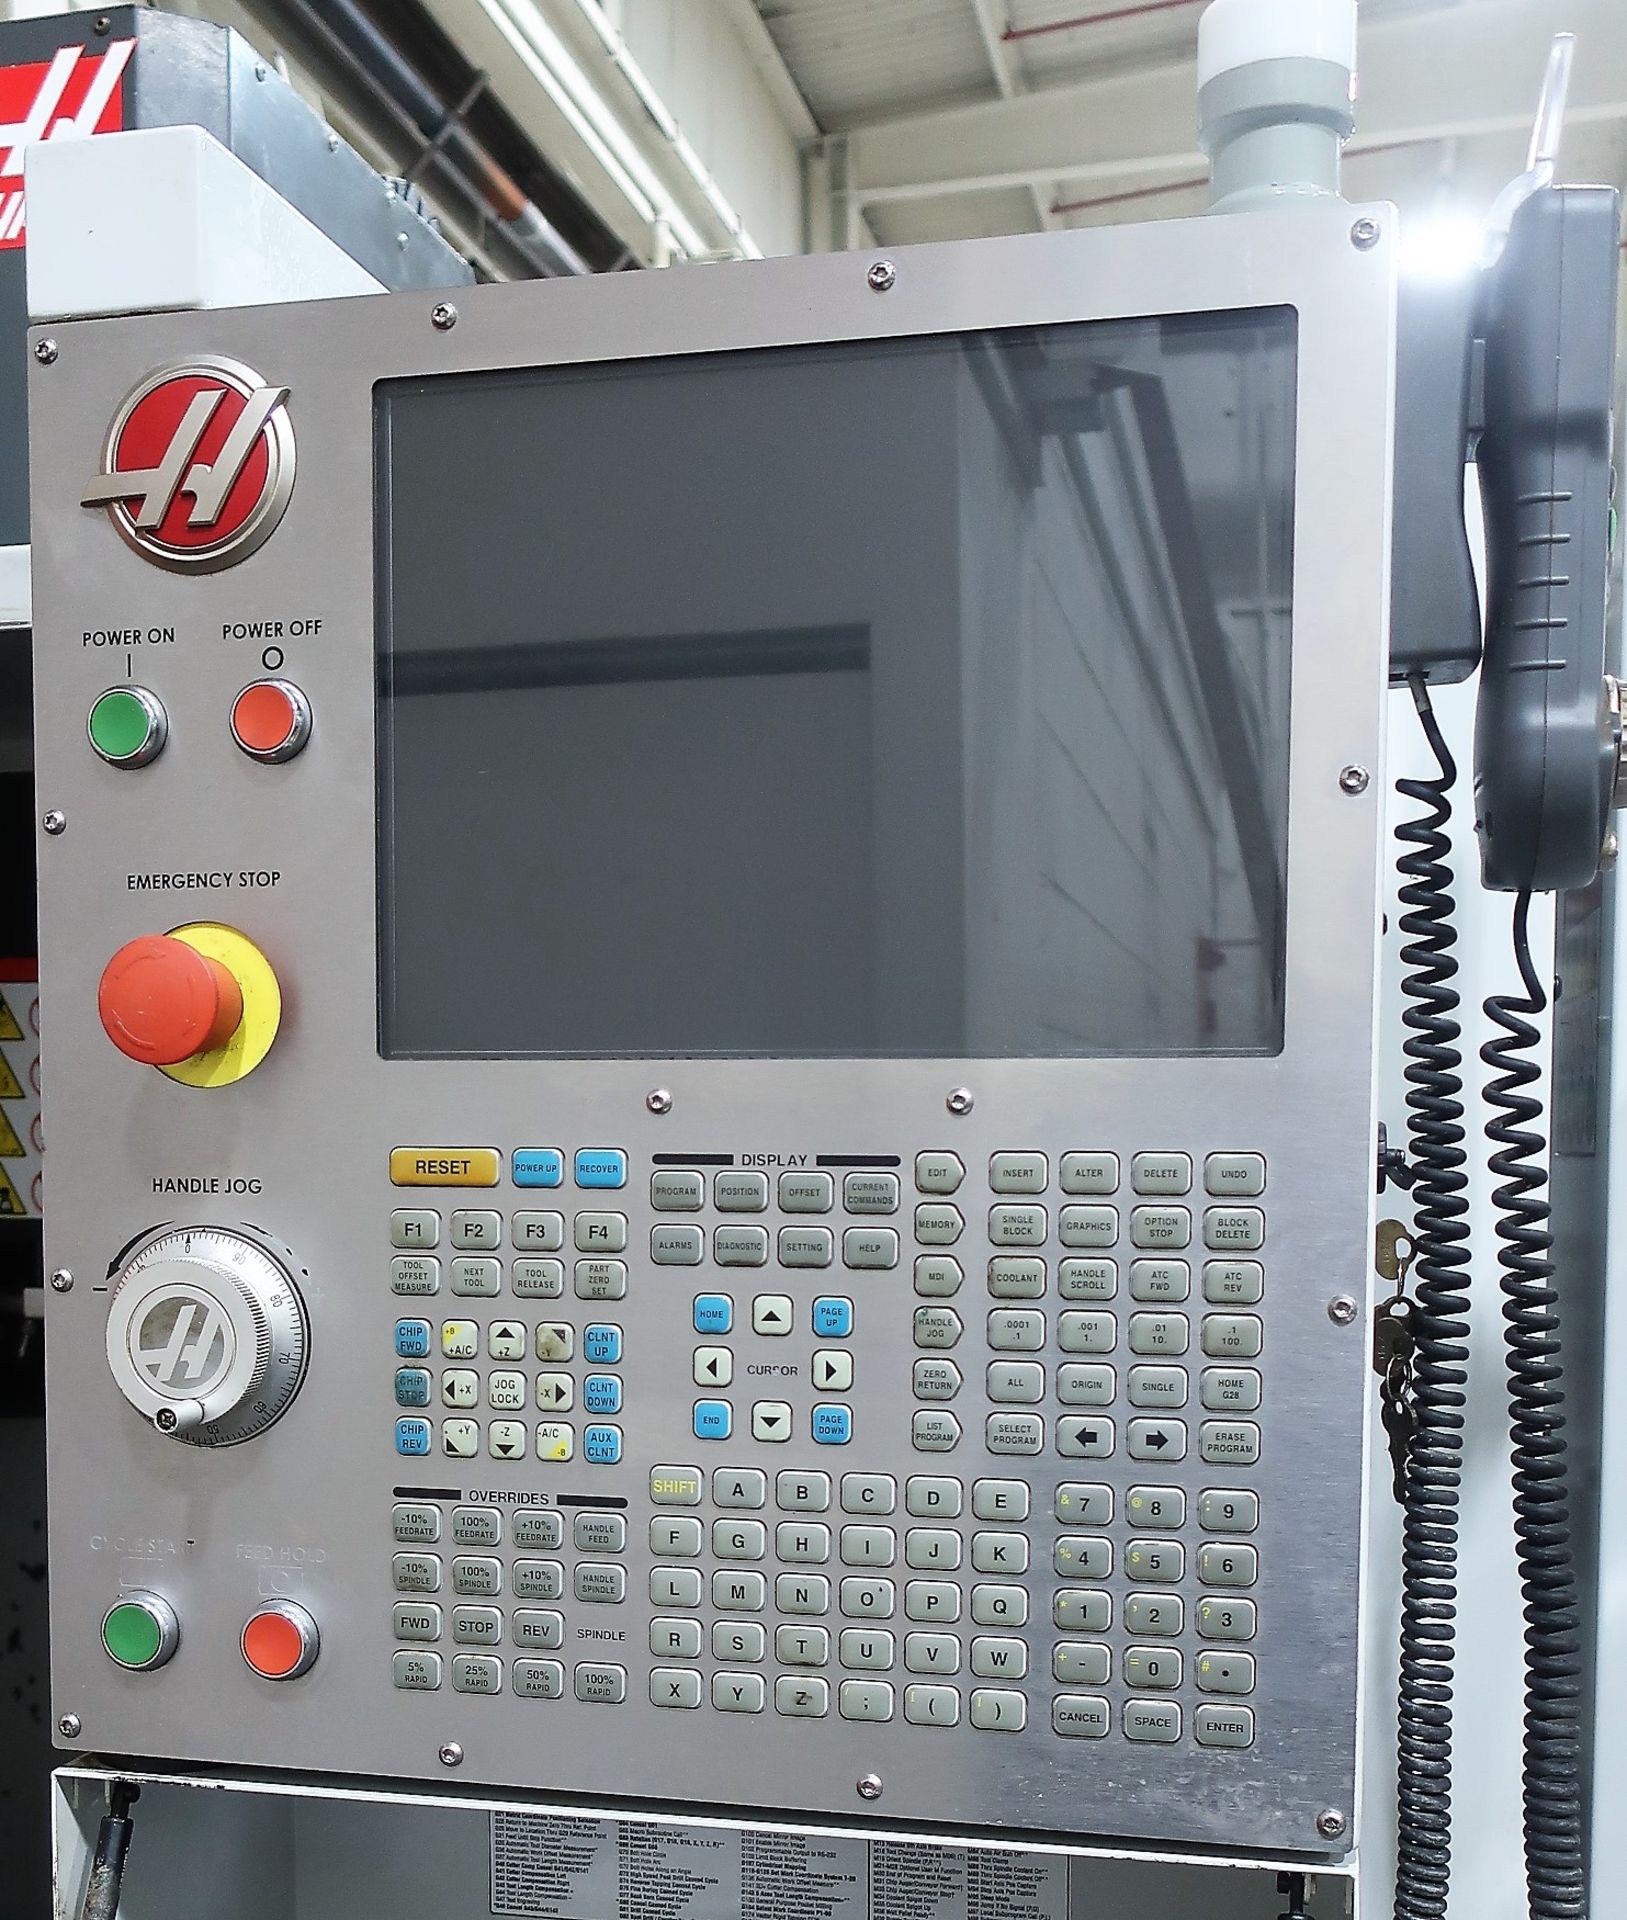 HAAS DT-2 4-AXIS CNC DRILL/TAP VERTICAL MACHINING CENTER, S/N 1135274, NEW 2016 - Image 2 of 9